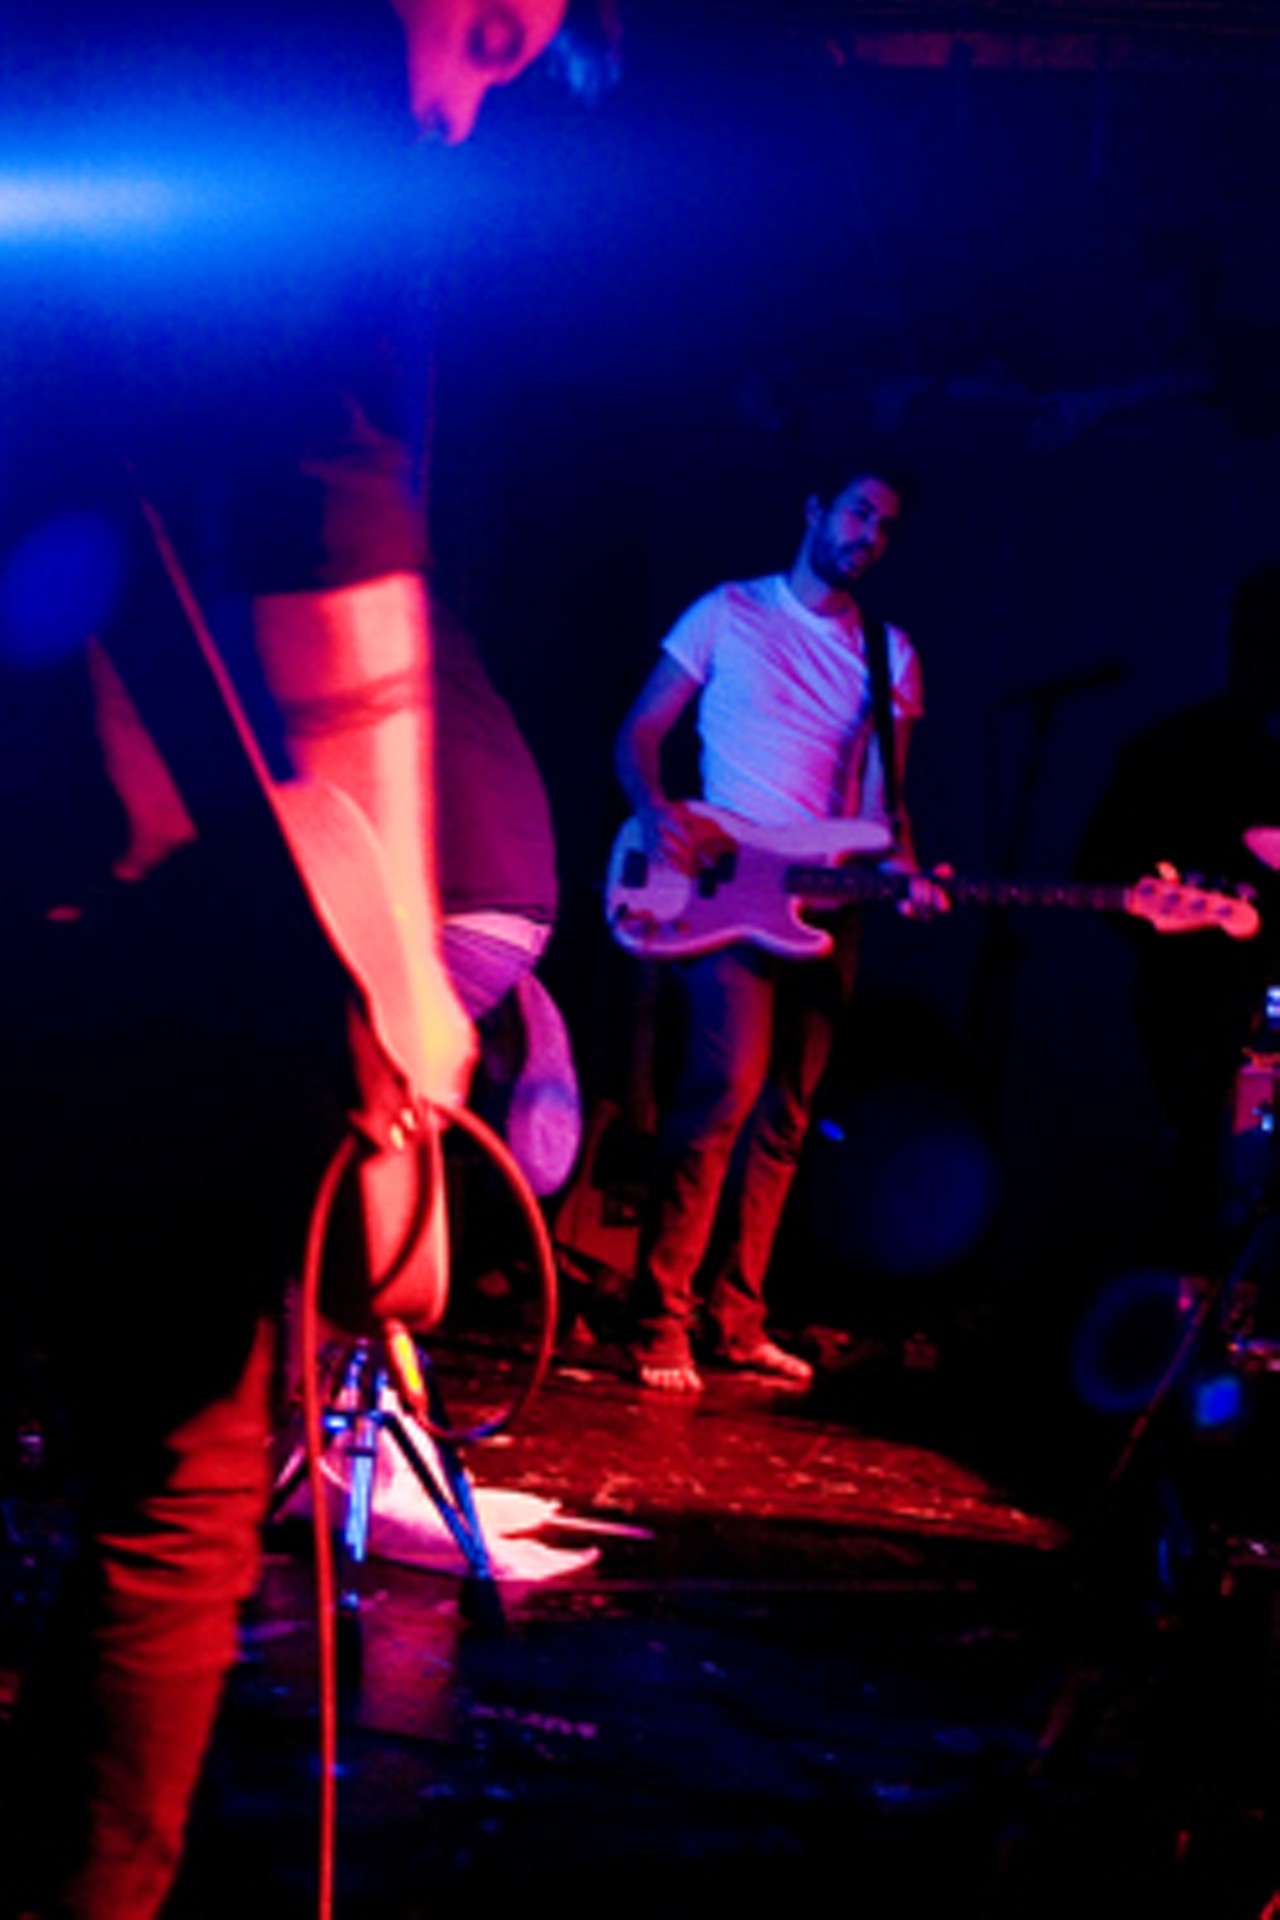 Read the Wolf Parade show review in A to Z.